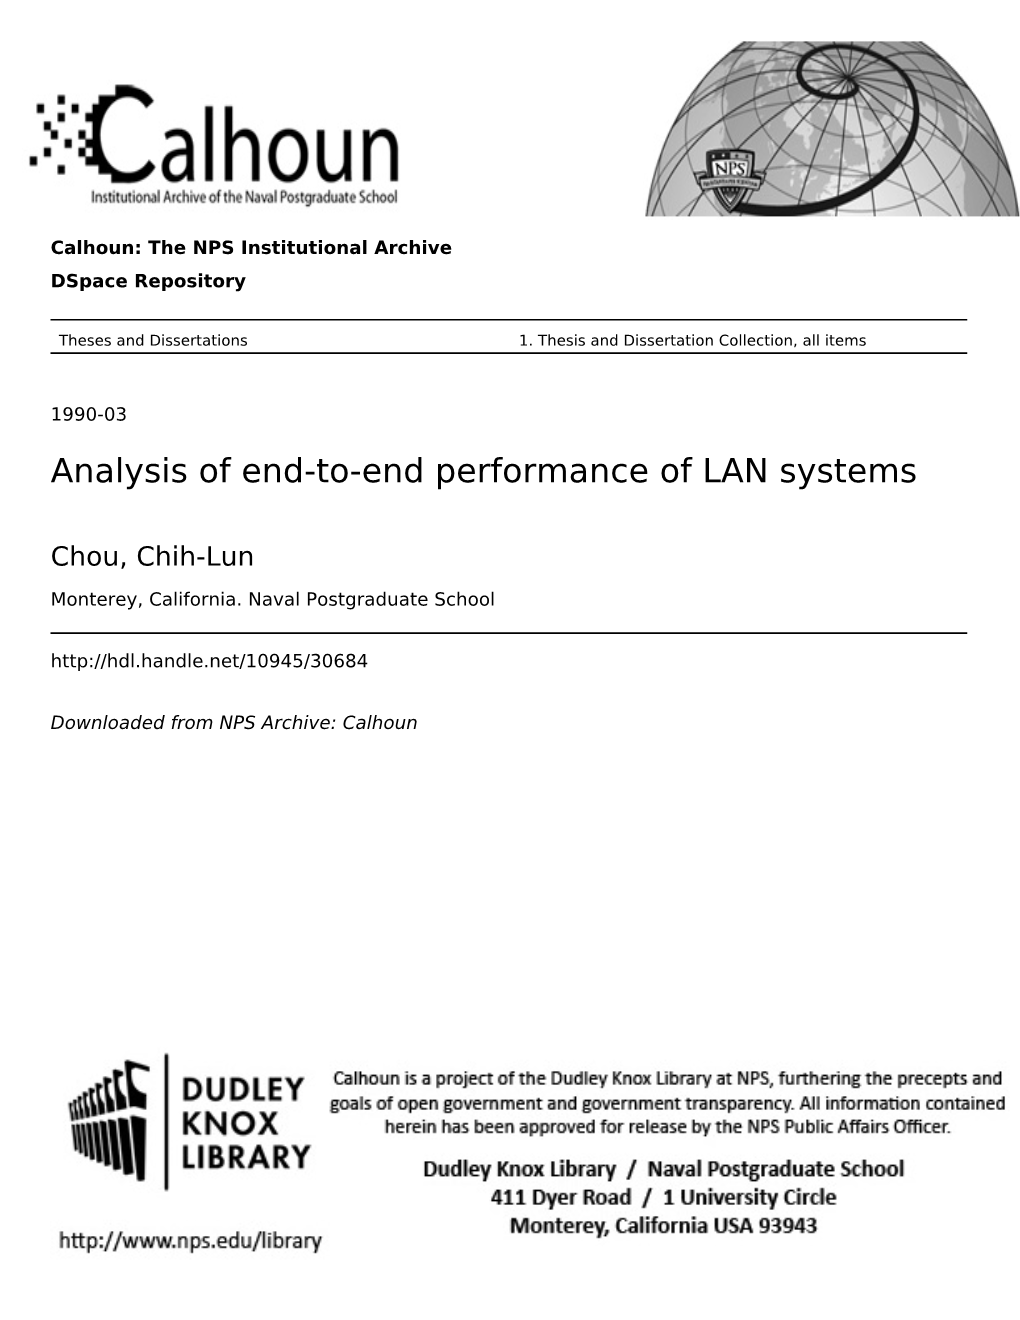 Analysis of End-To-End Performance of LAN Systems